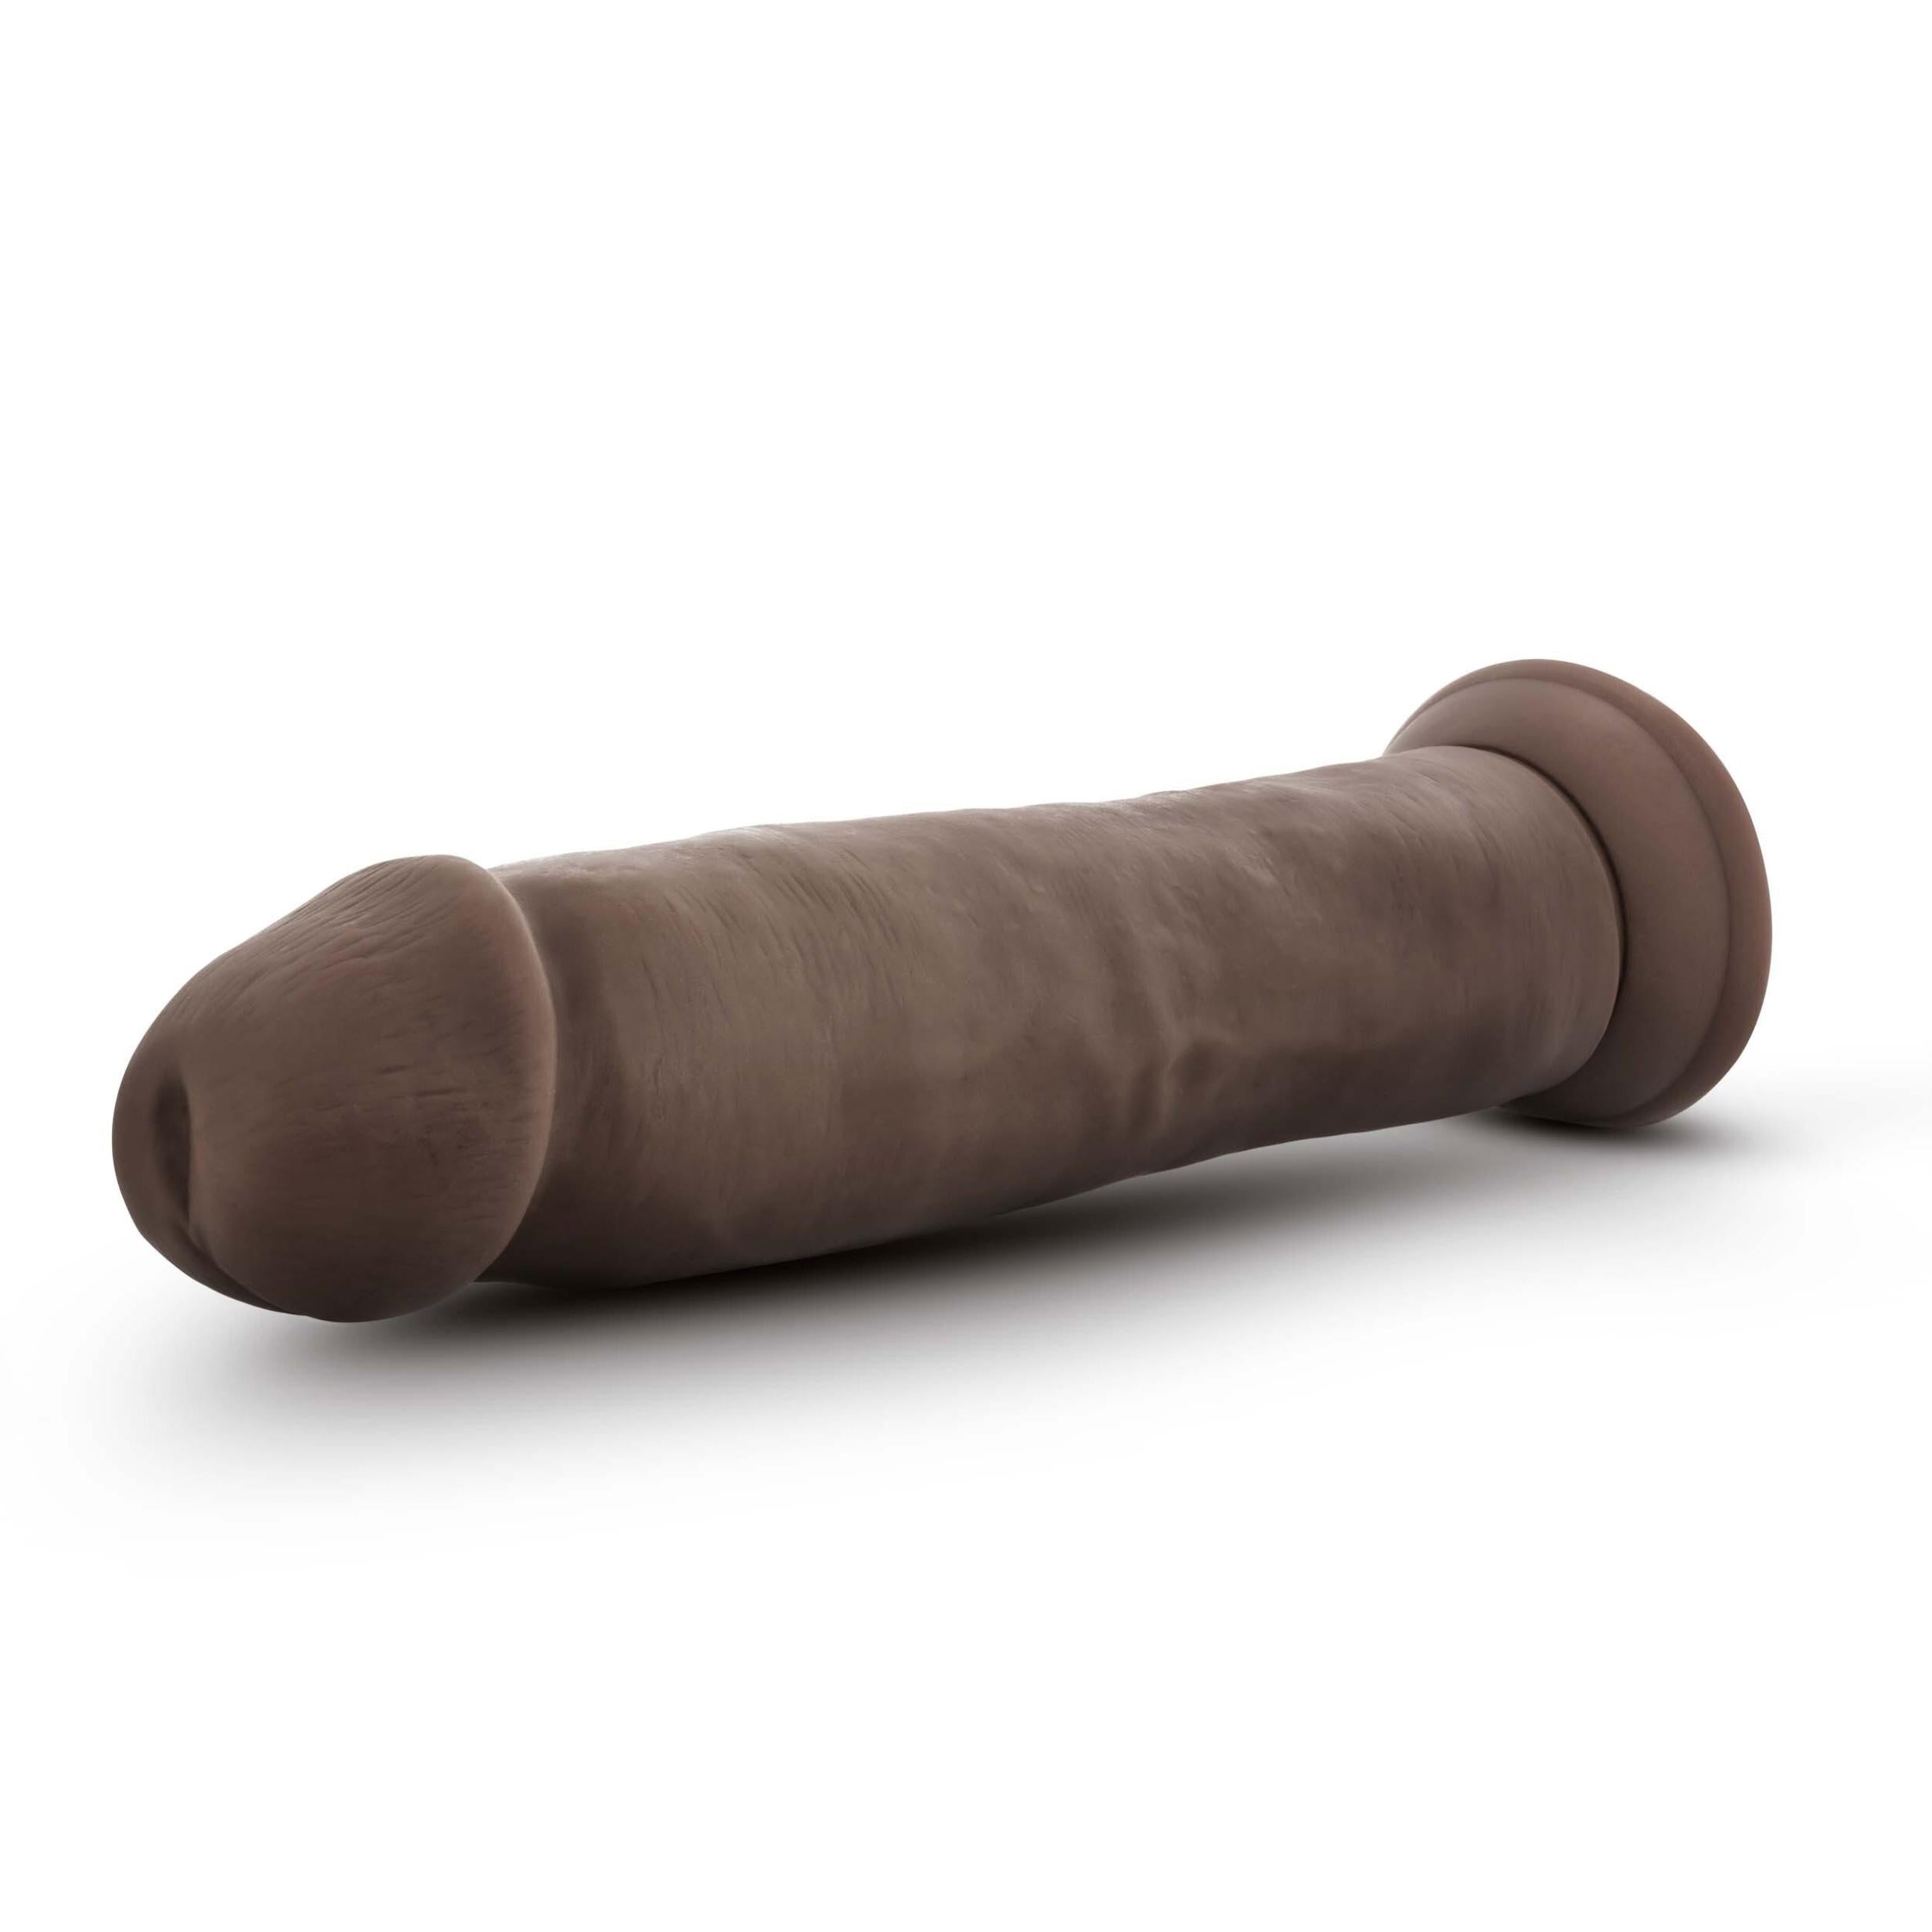 Dr. Skin Plus - 9 Inch Posable Thick Dildo